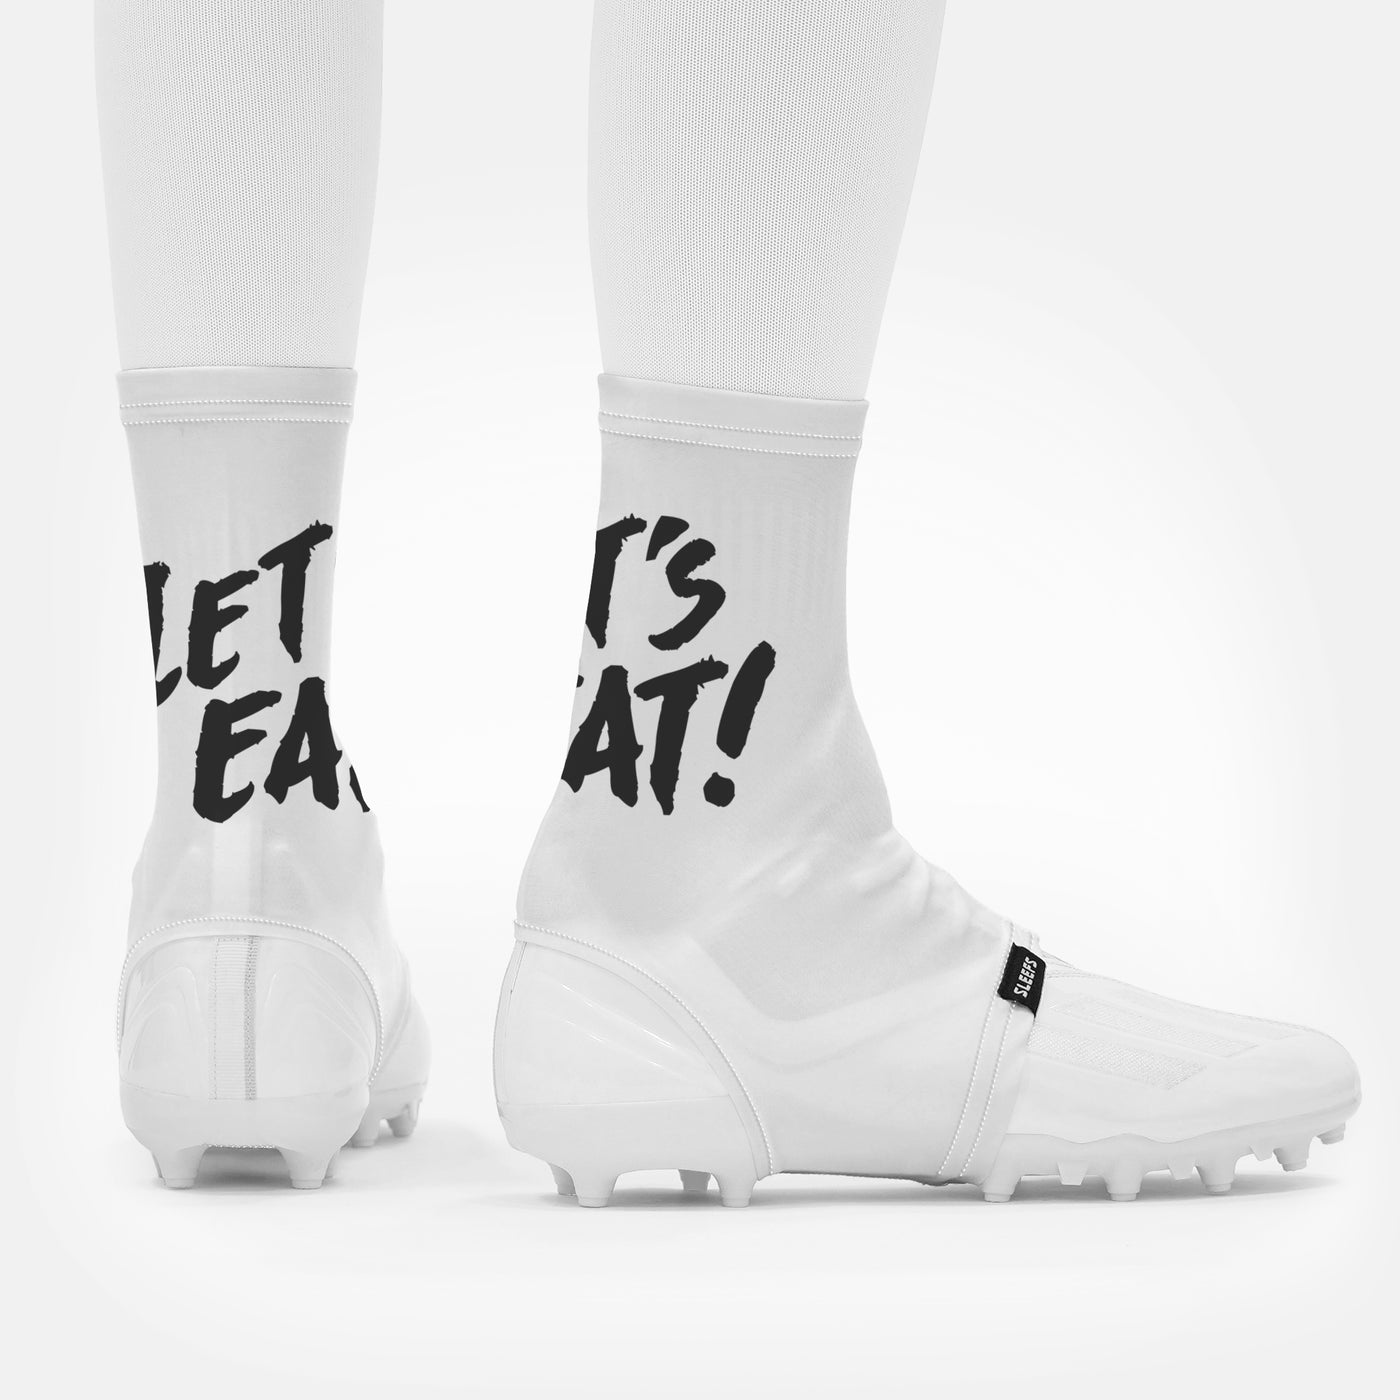 Let's Eat White Spats / Cleat Covers